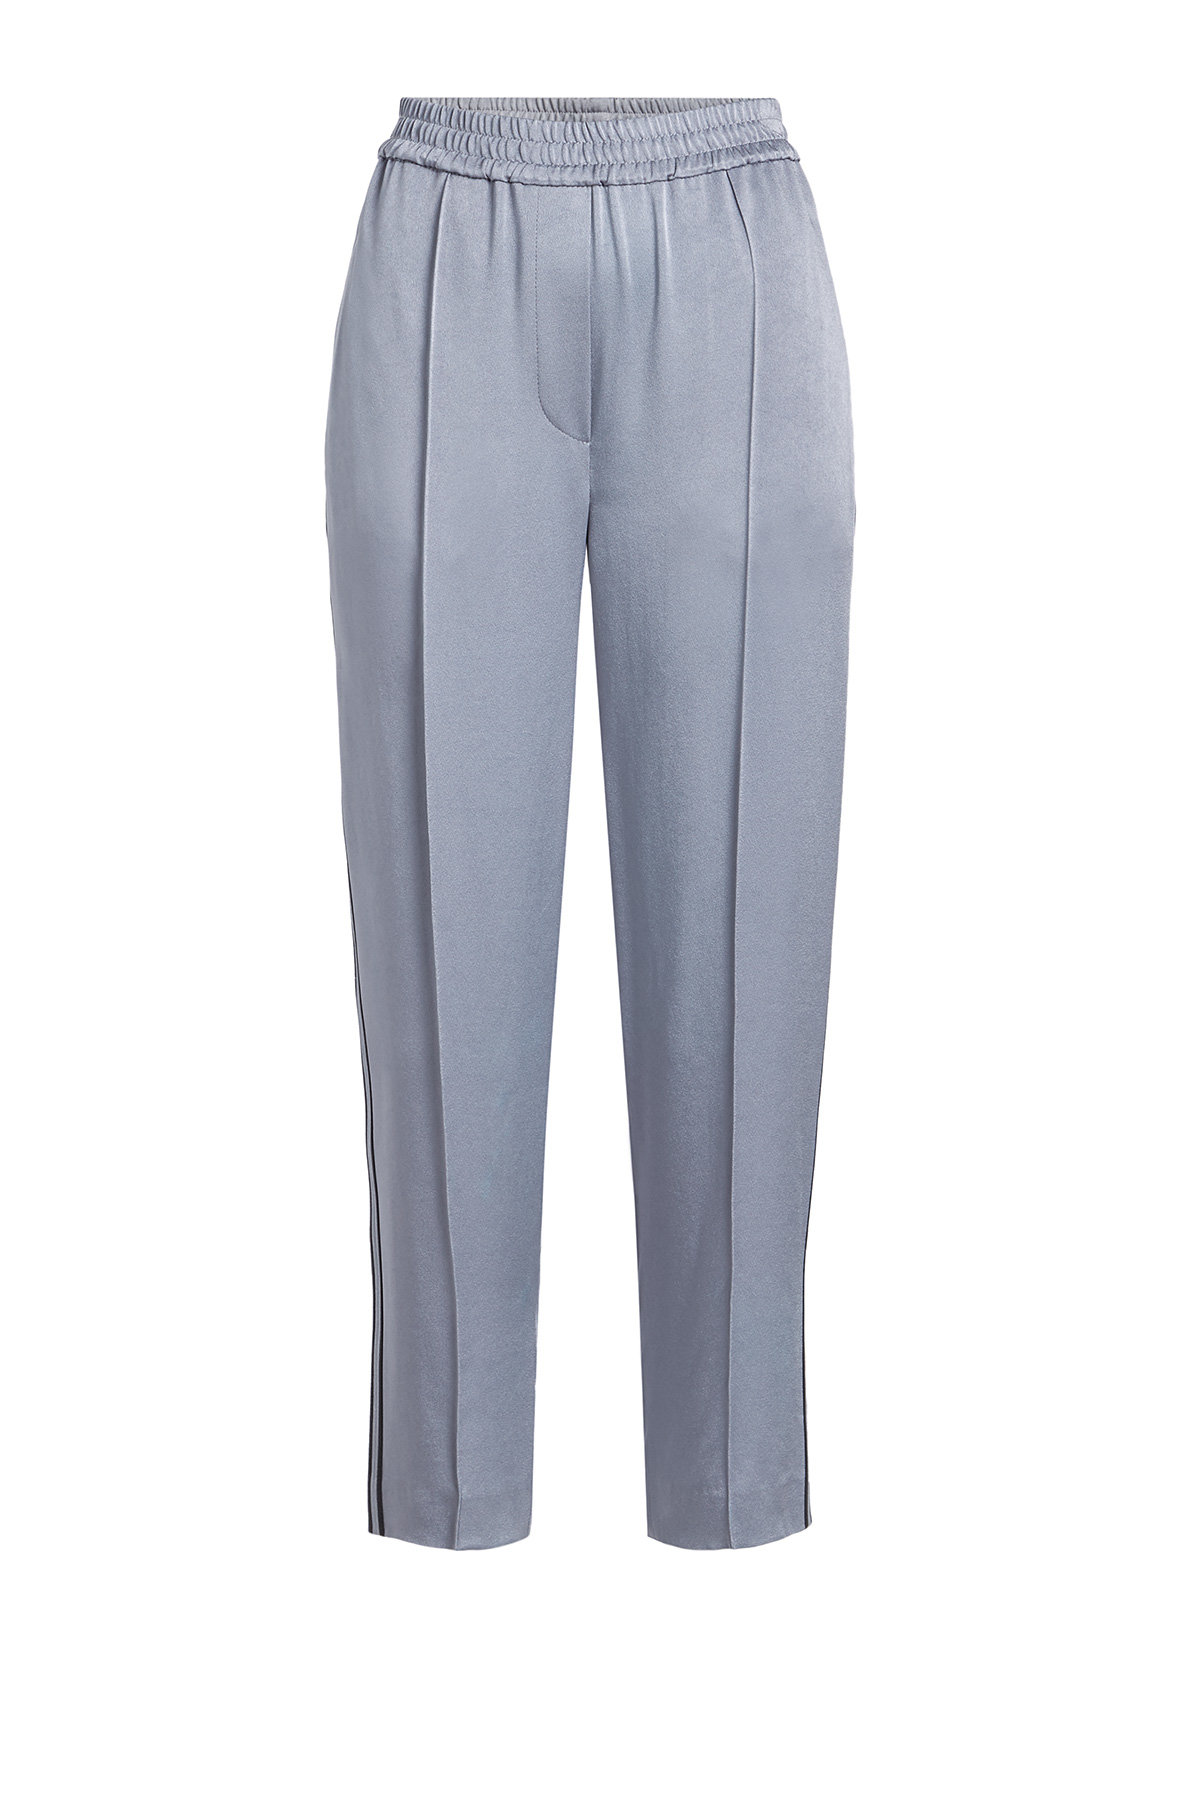 Brunello Cucinelli - Cropped Satin Track Pants